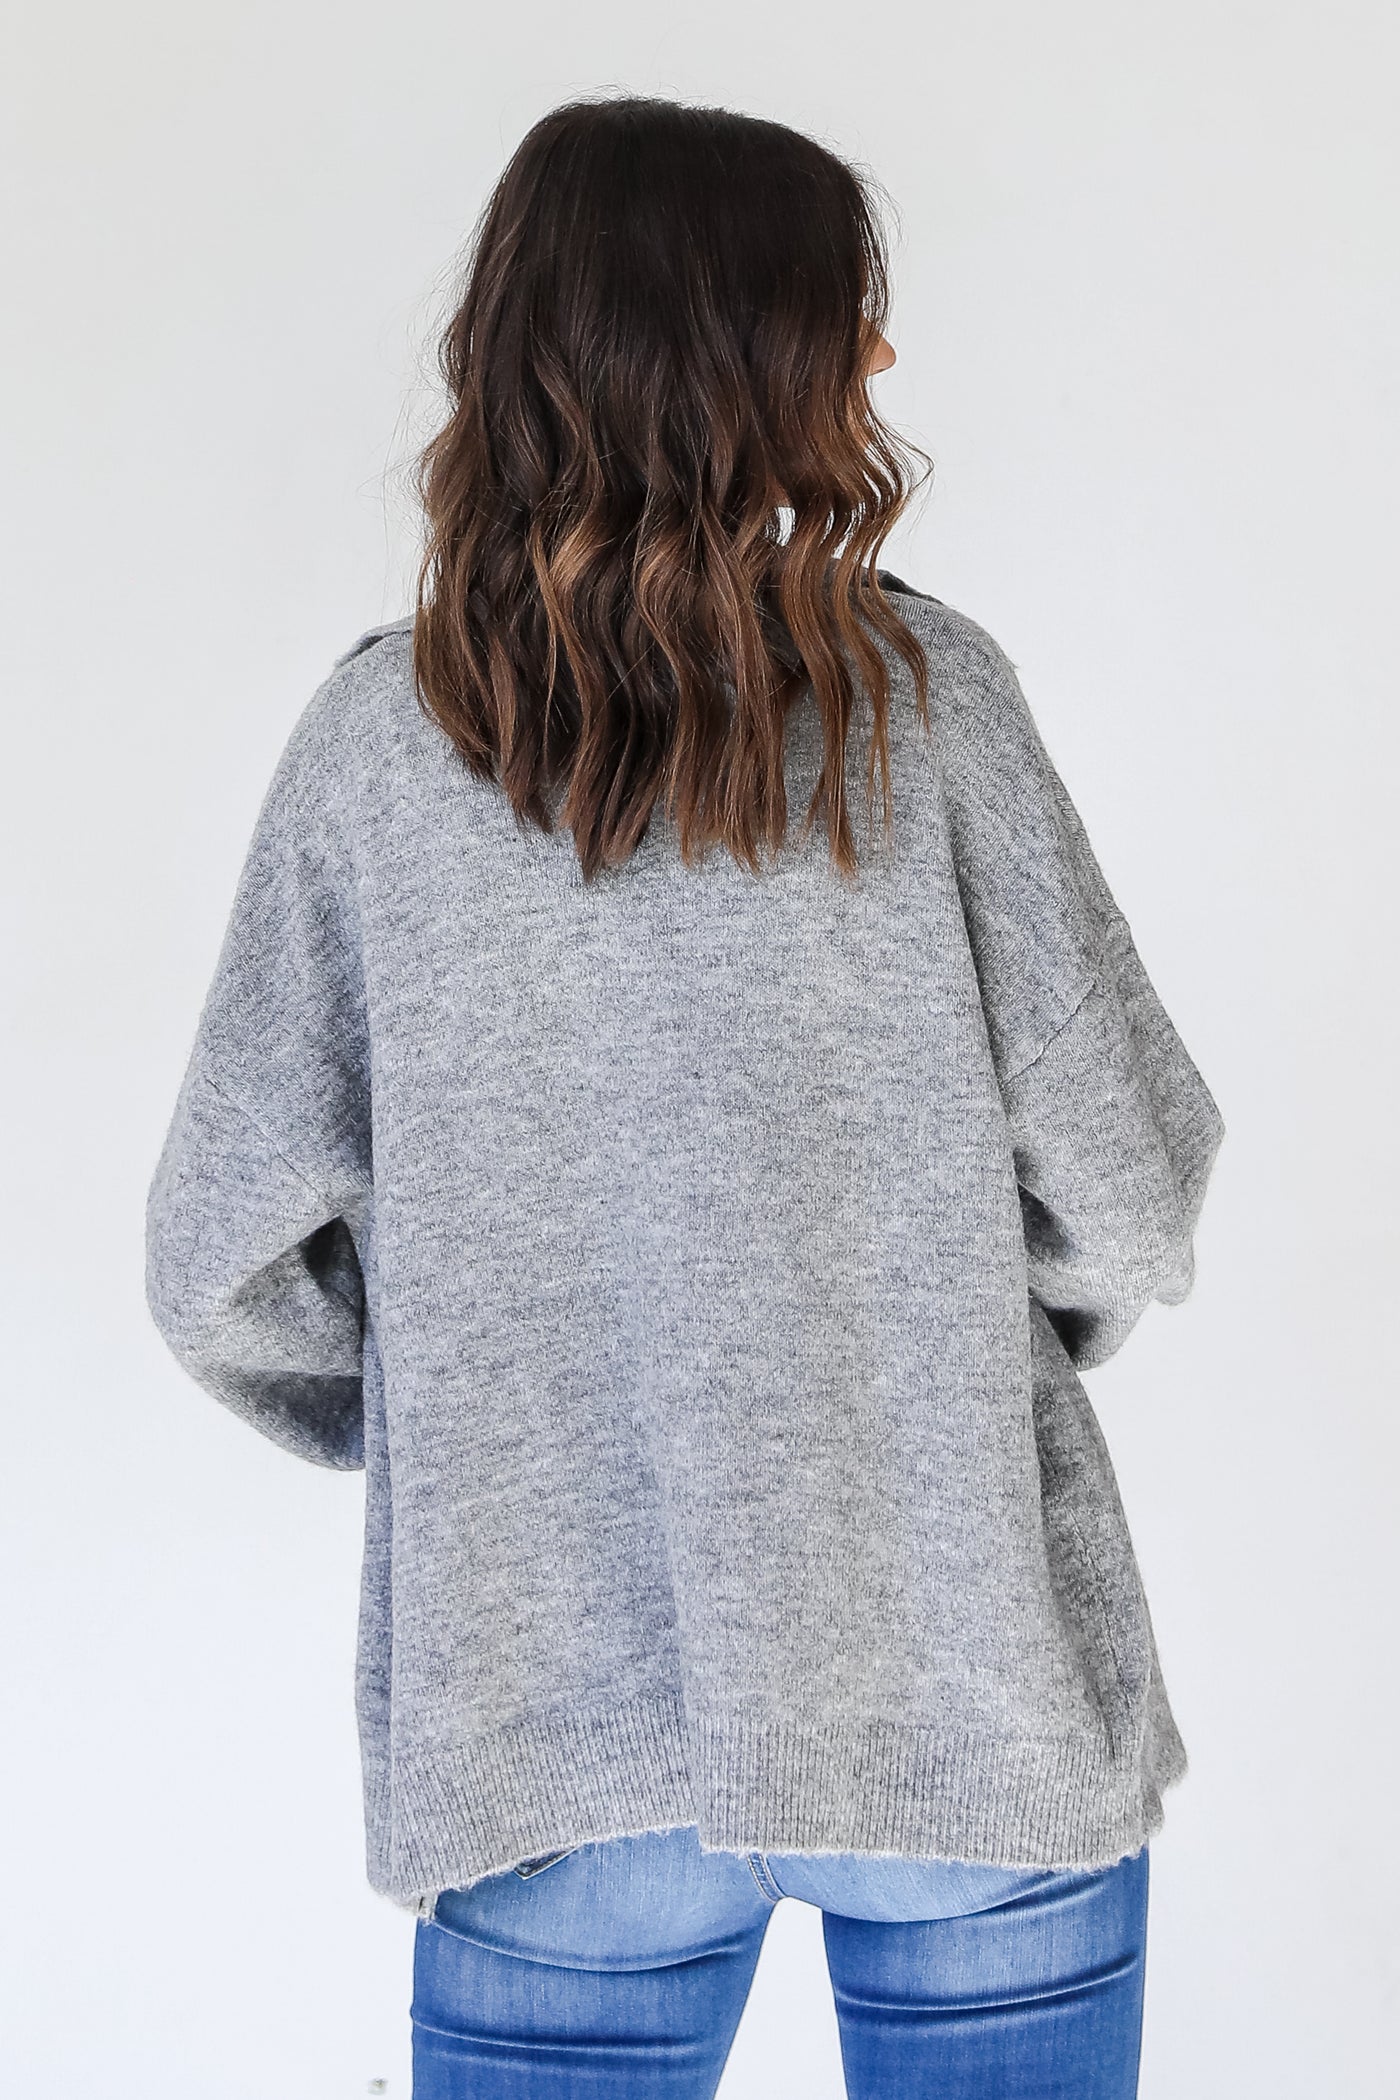 Sweater Cardigan in heather grey back view